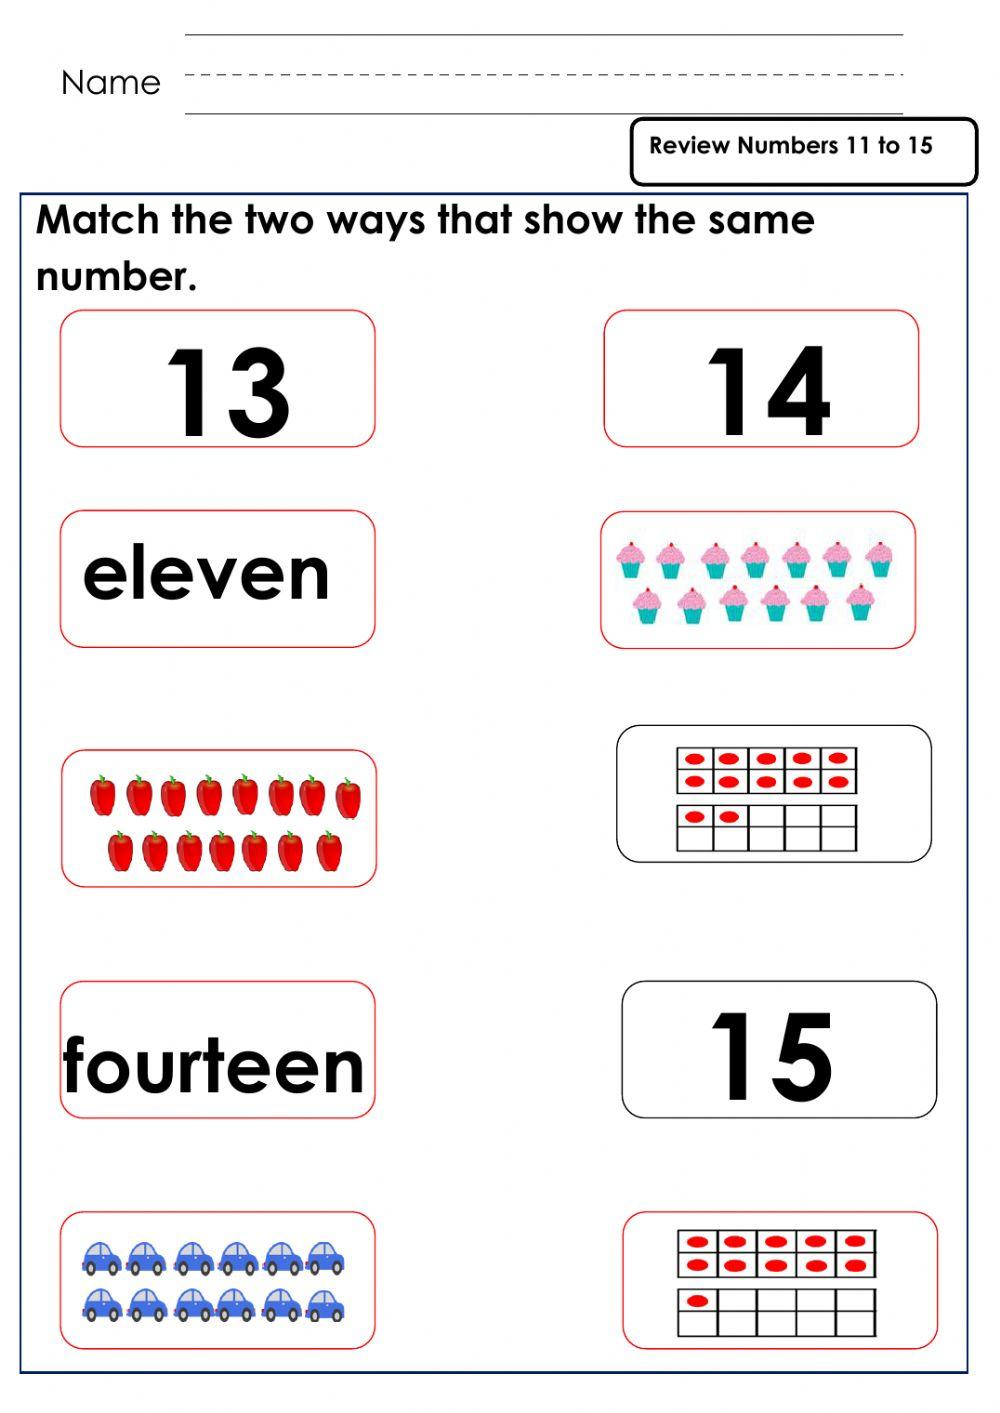 Review Numbers 11 to 15